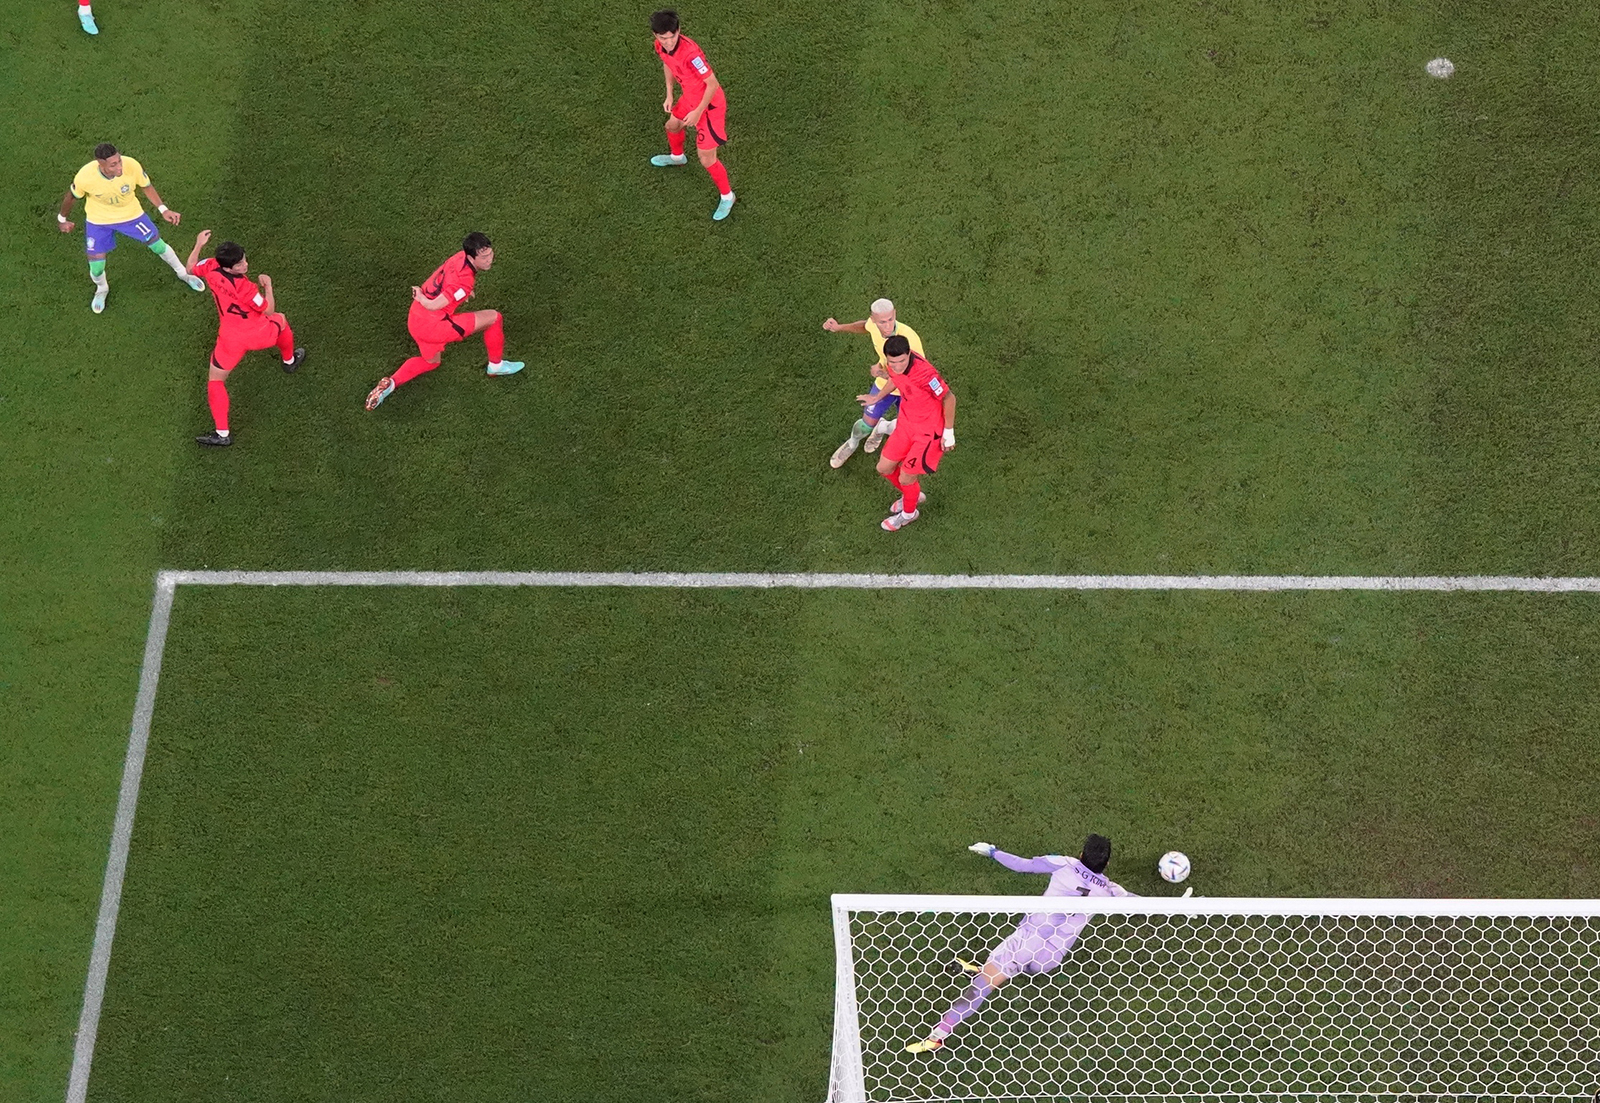 Kim Seung-gyu makes a save from Brazil's Raphinha.